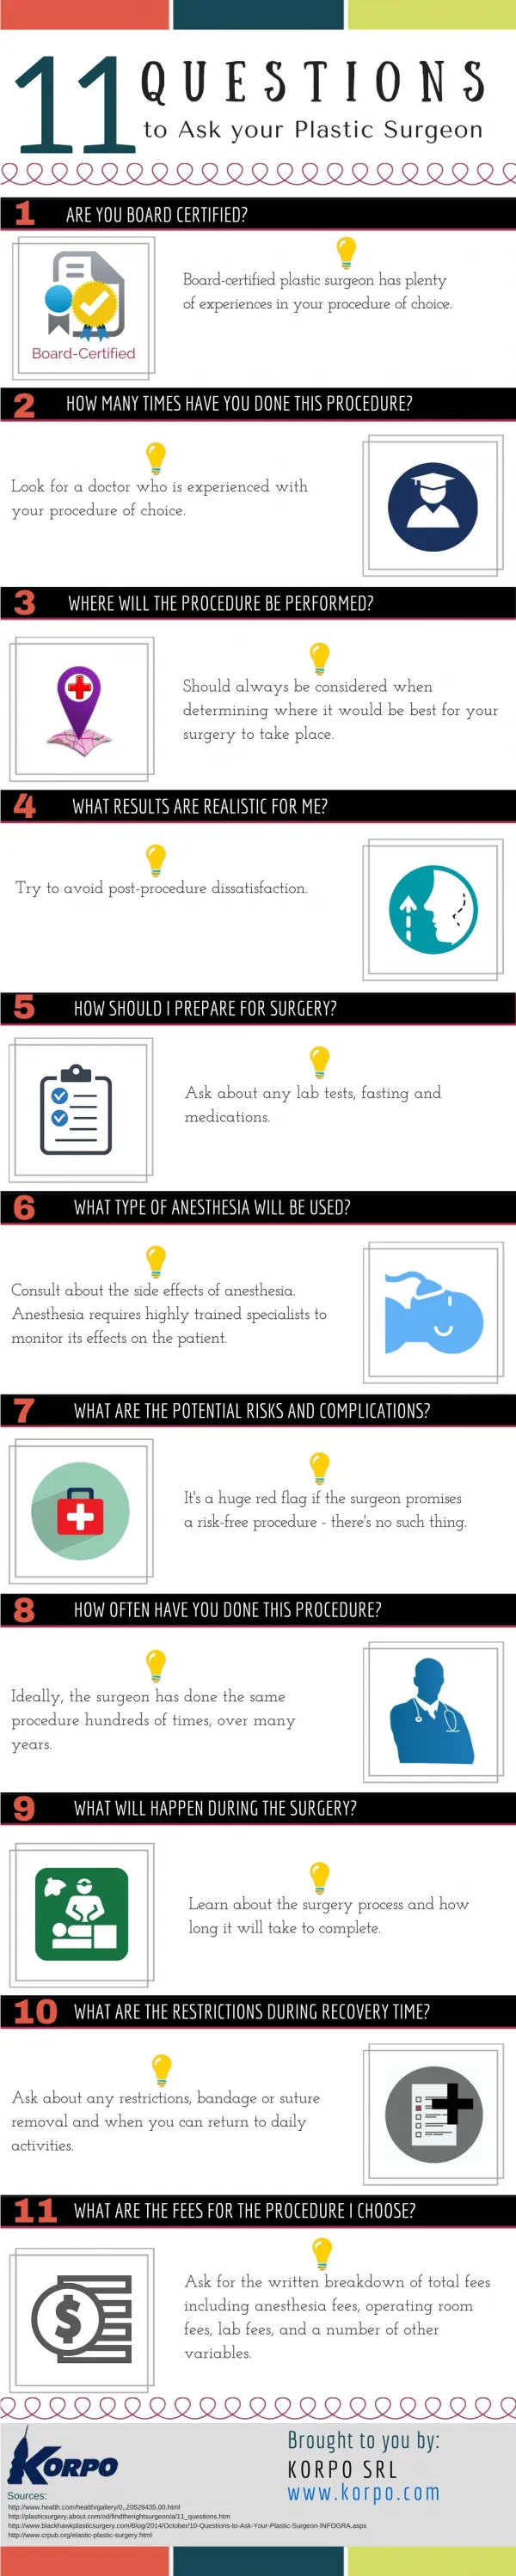 Infographic: 11 Questions to Ask your Plastic Surgeon